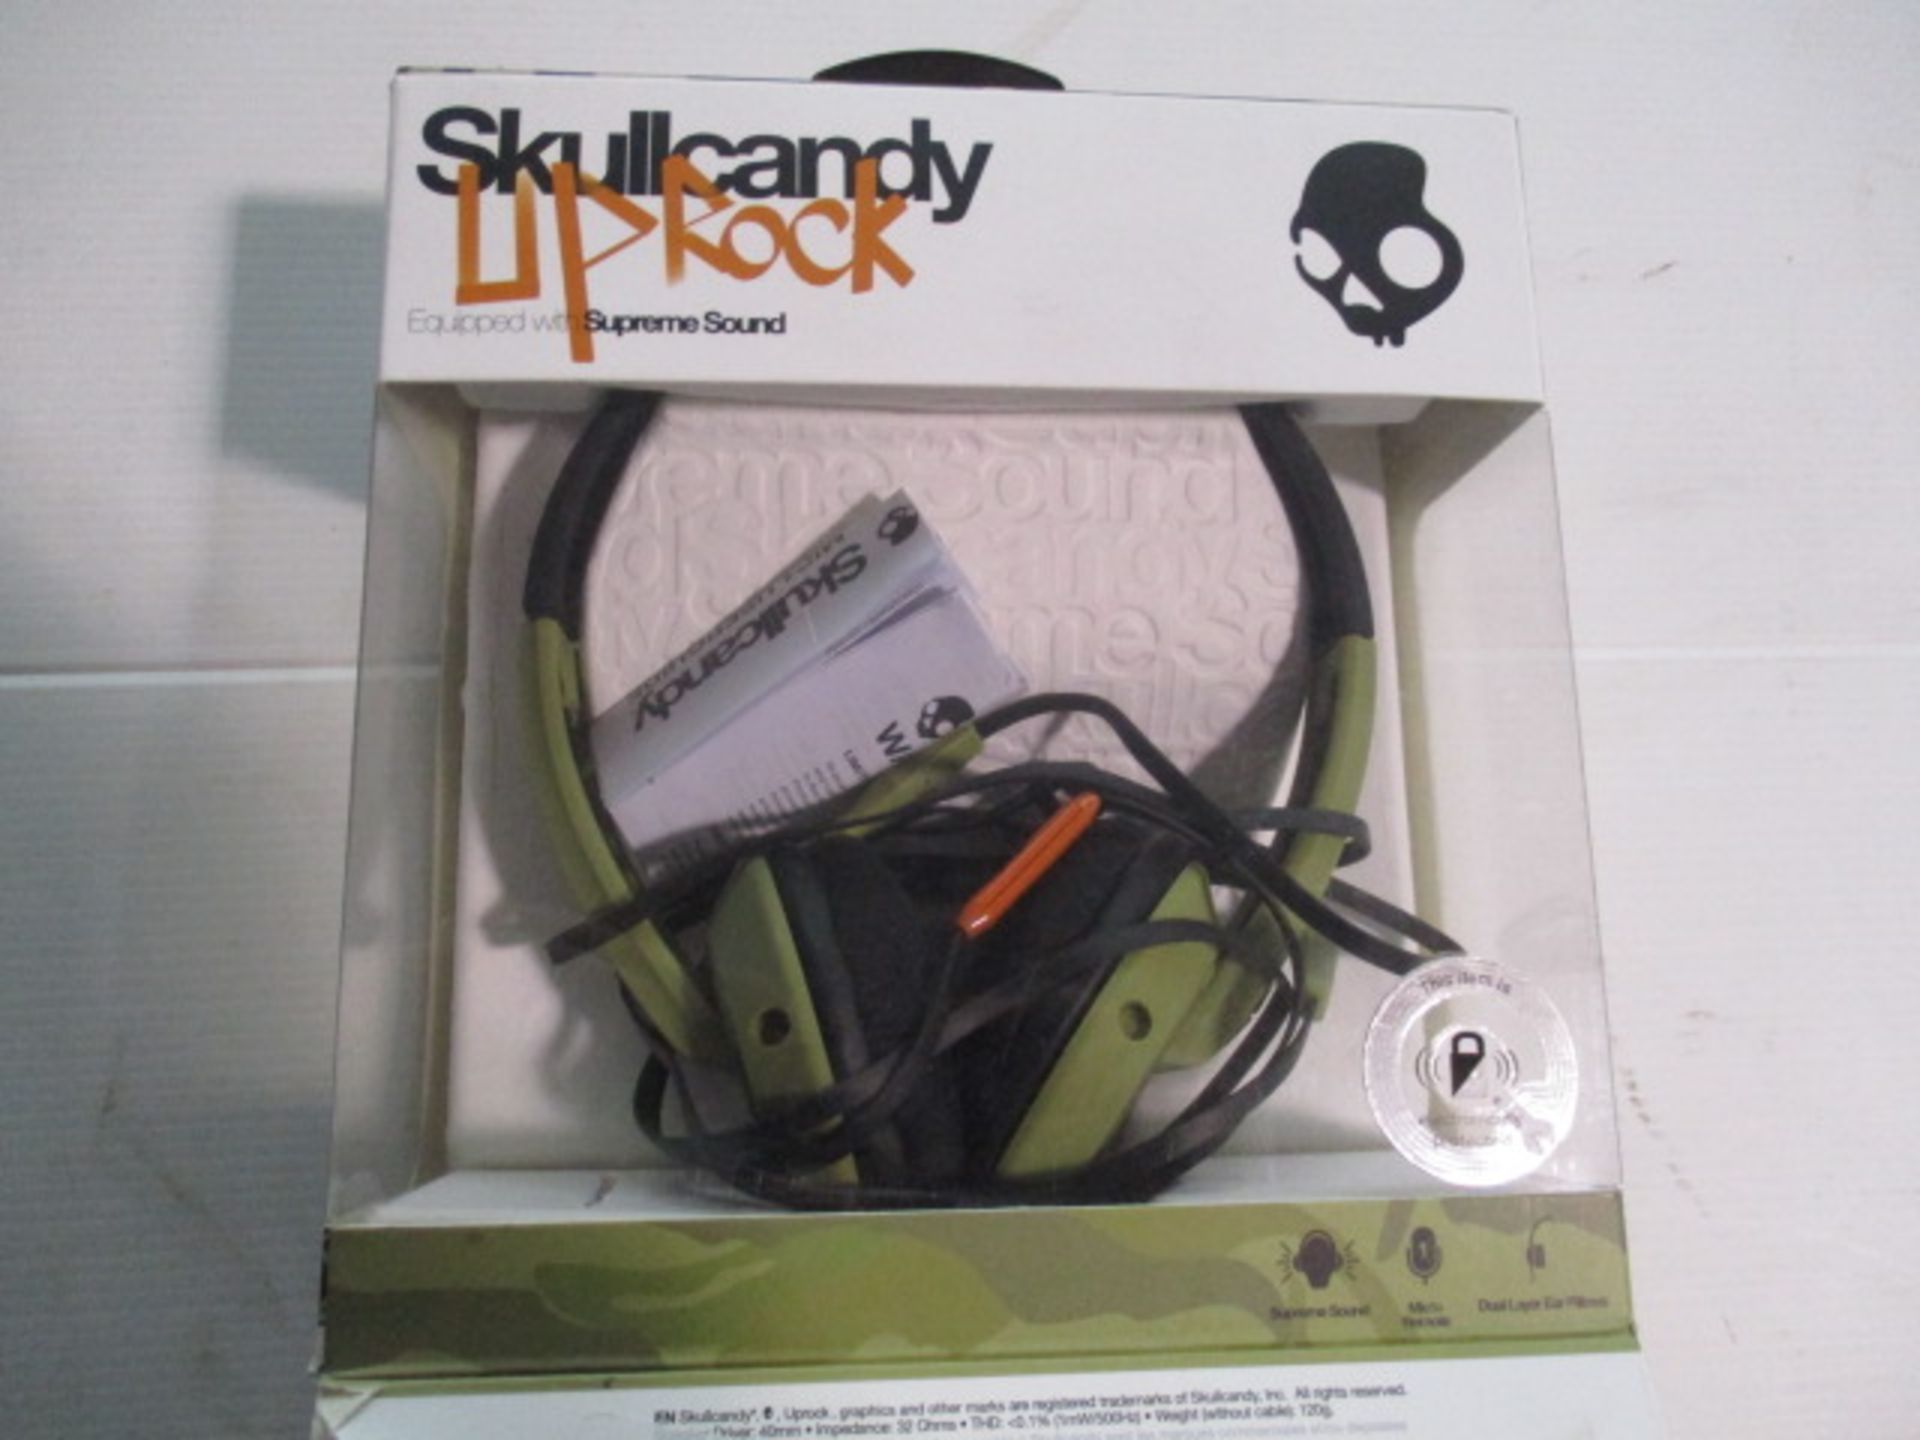 SkullCandy Uprock Headfones boxed and unchecked